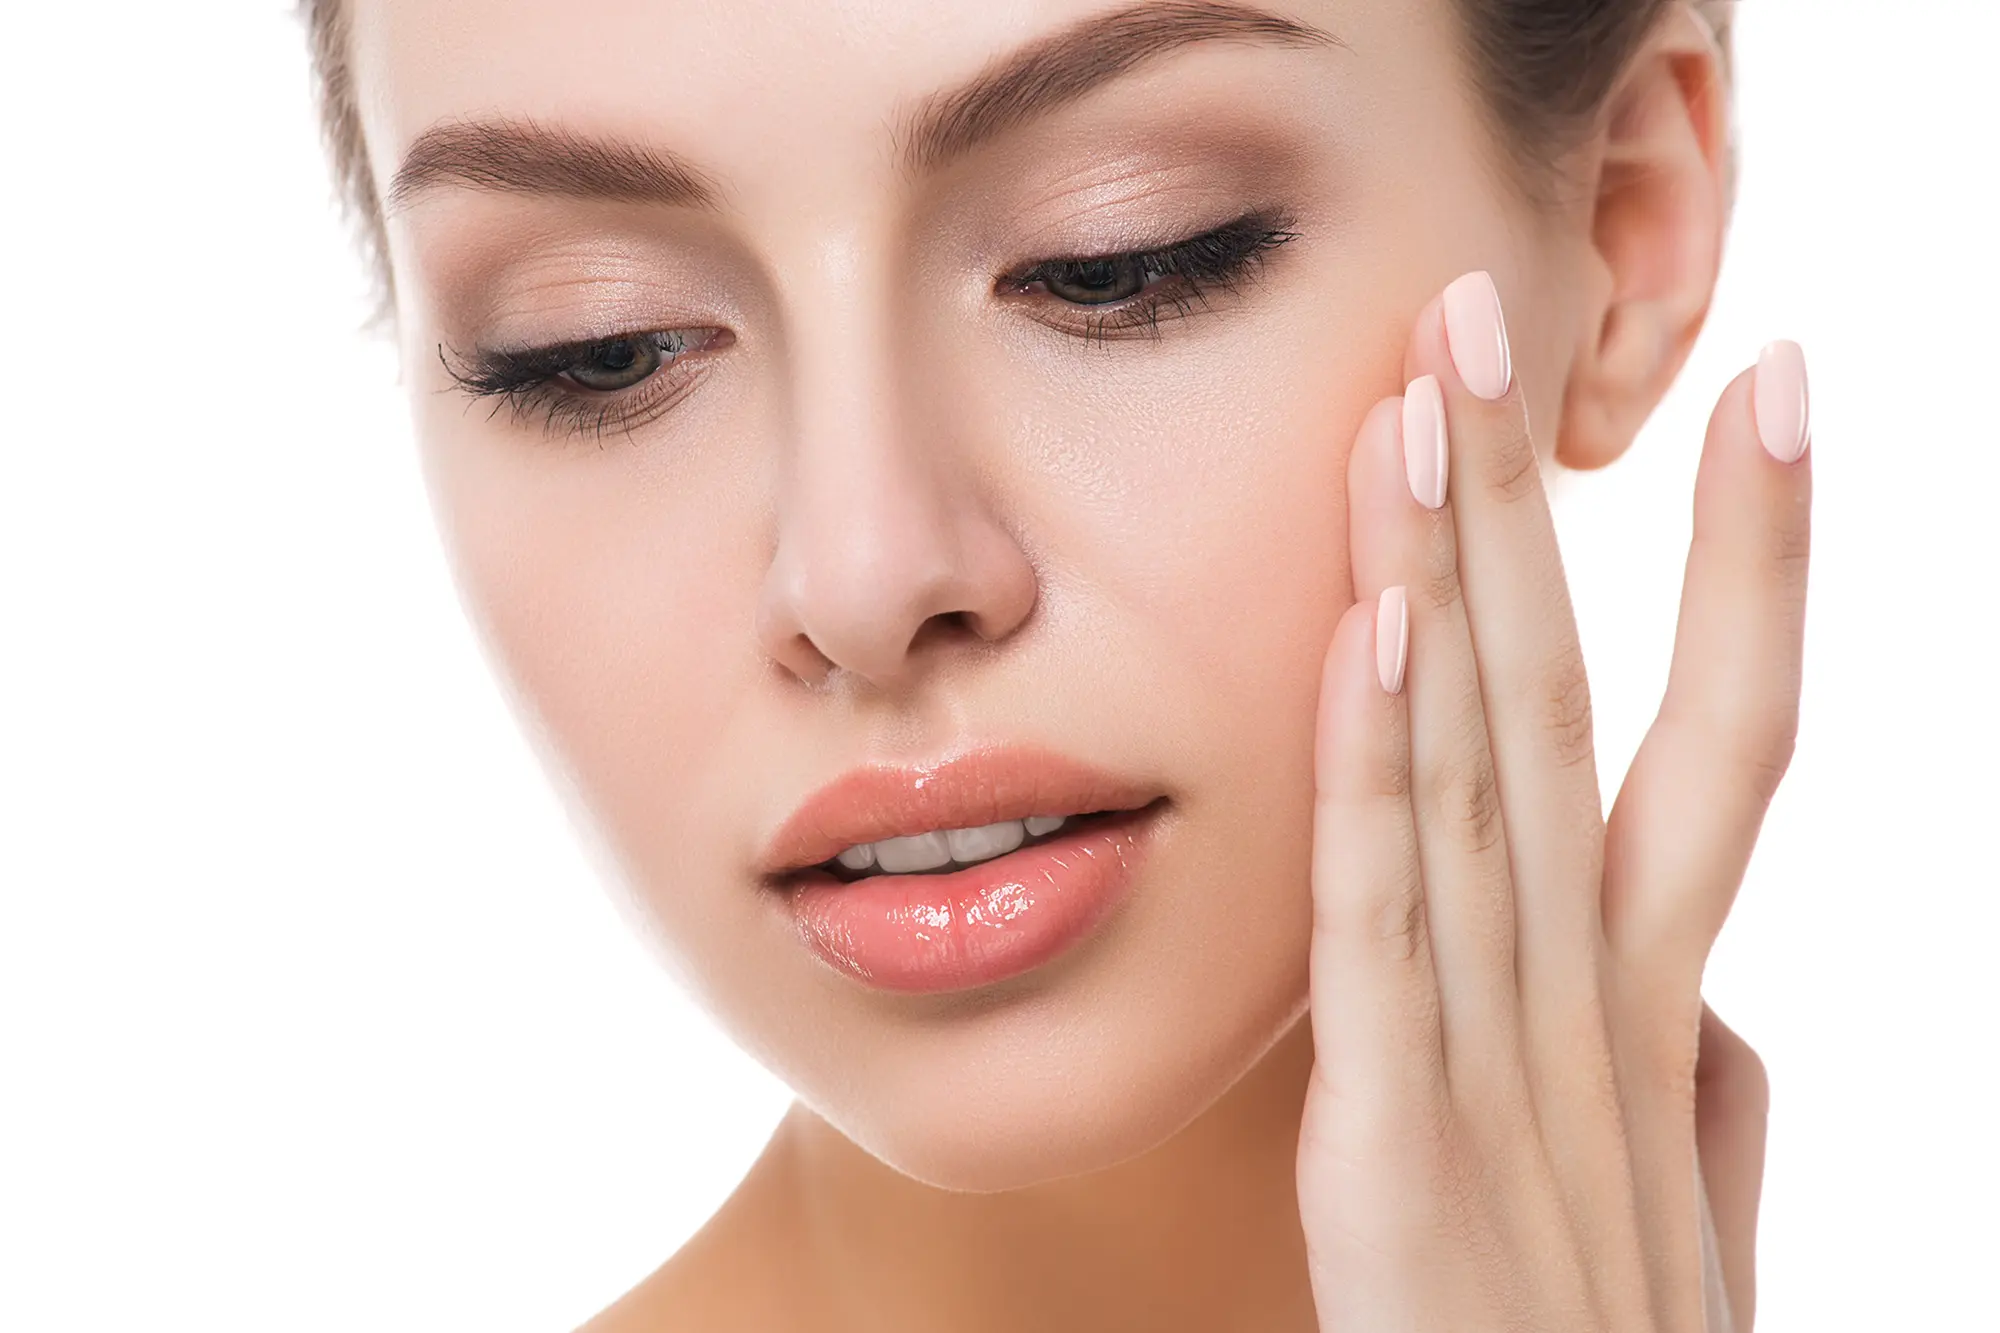 WHICH NUTRIENTS ARE THE BEST FOR SKIN HEALTH?